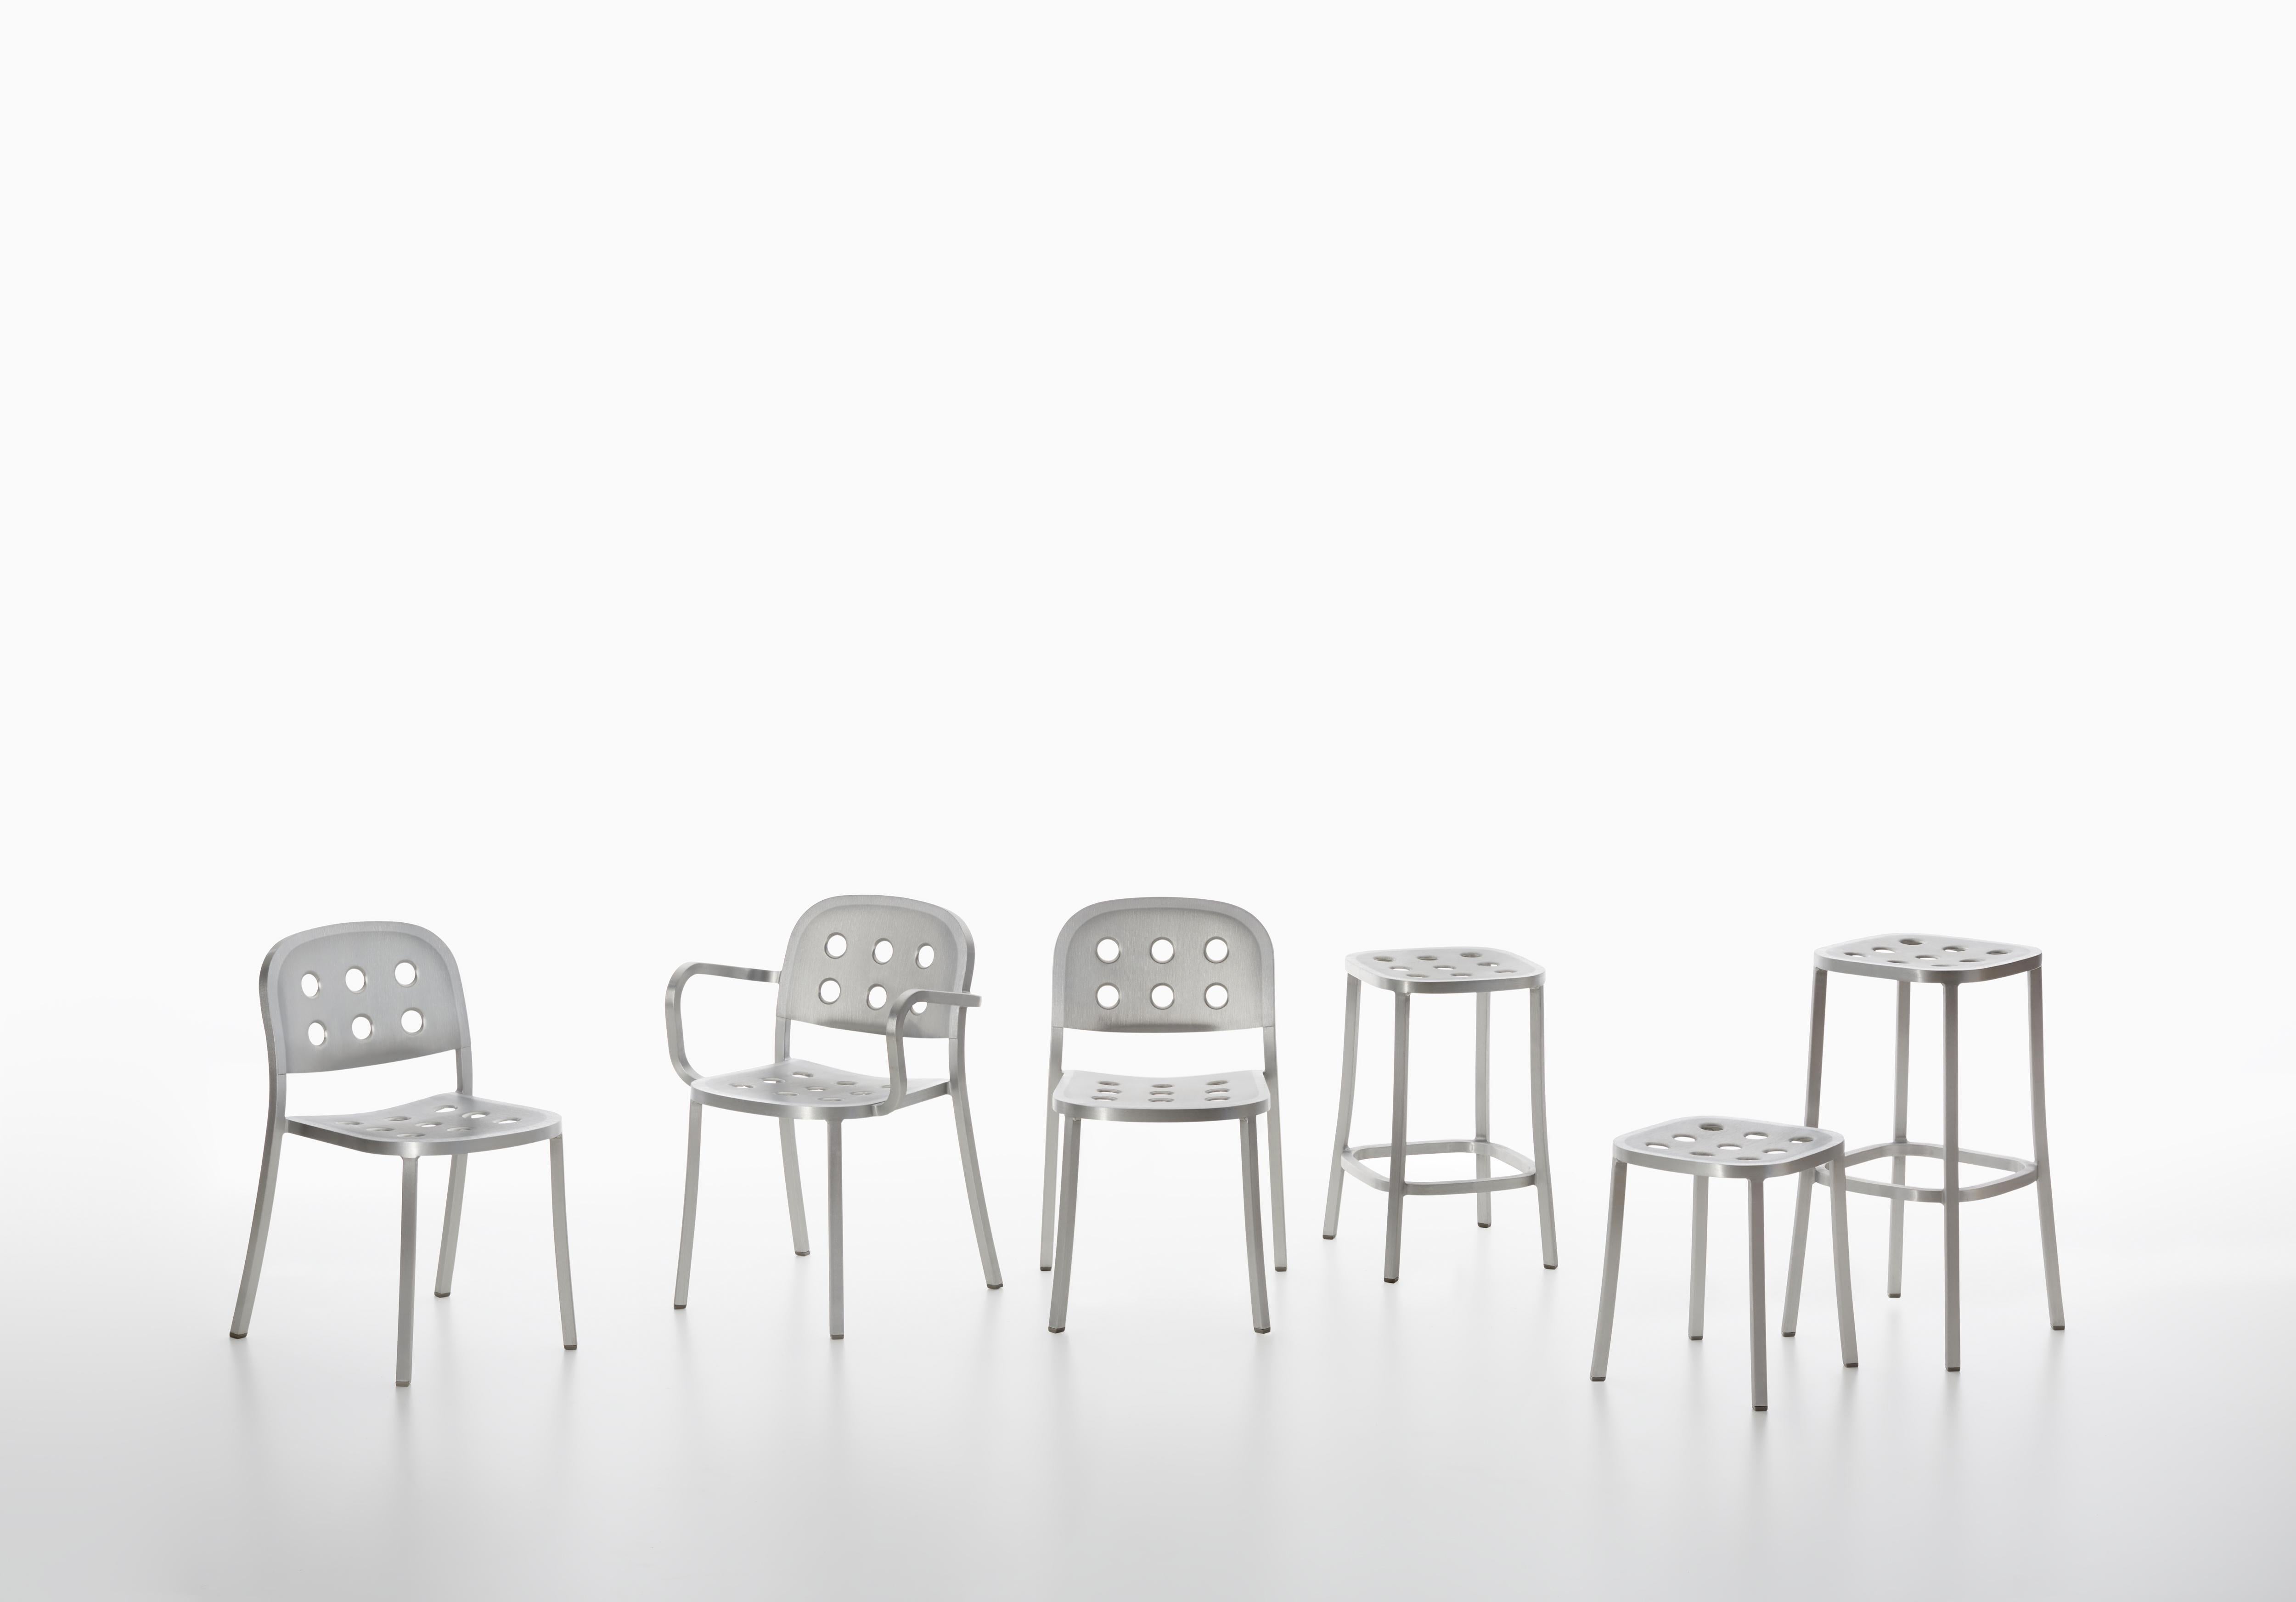 Modern Emeco 1 Inch All Aluminum Stacking Chair by Jasper Morrison, 1stdibs Exclusive For Sale